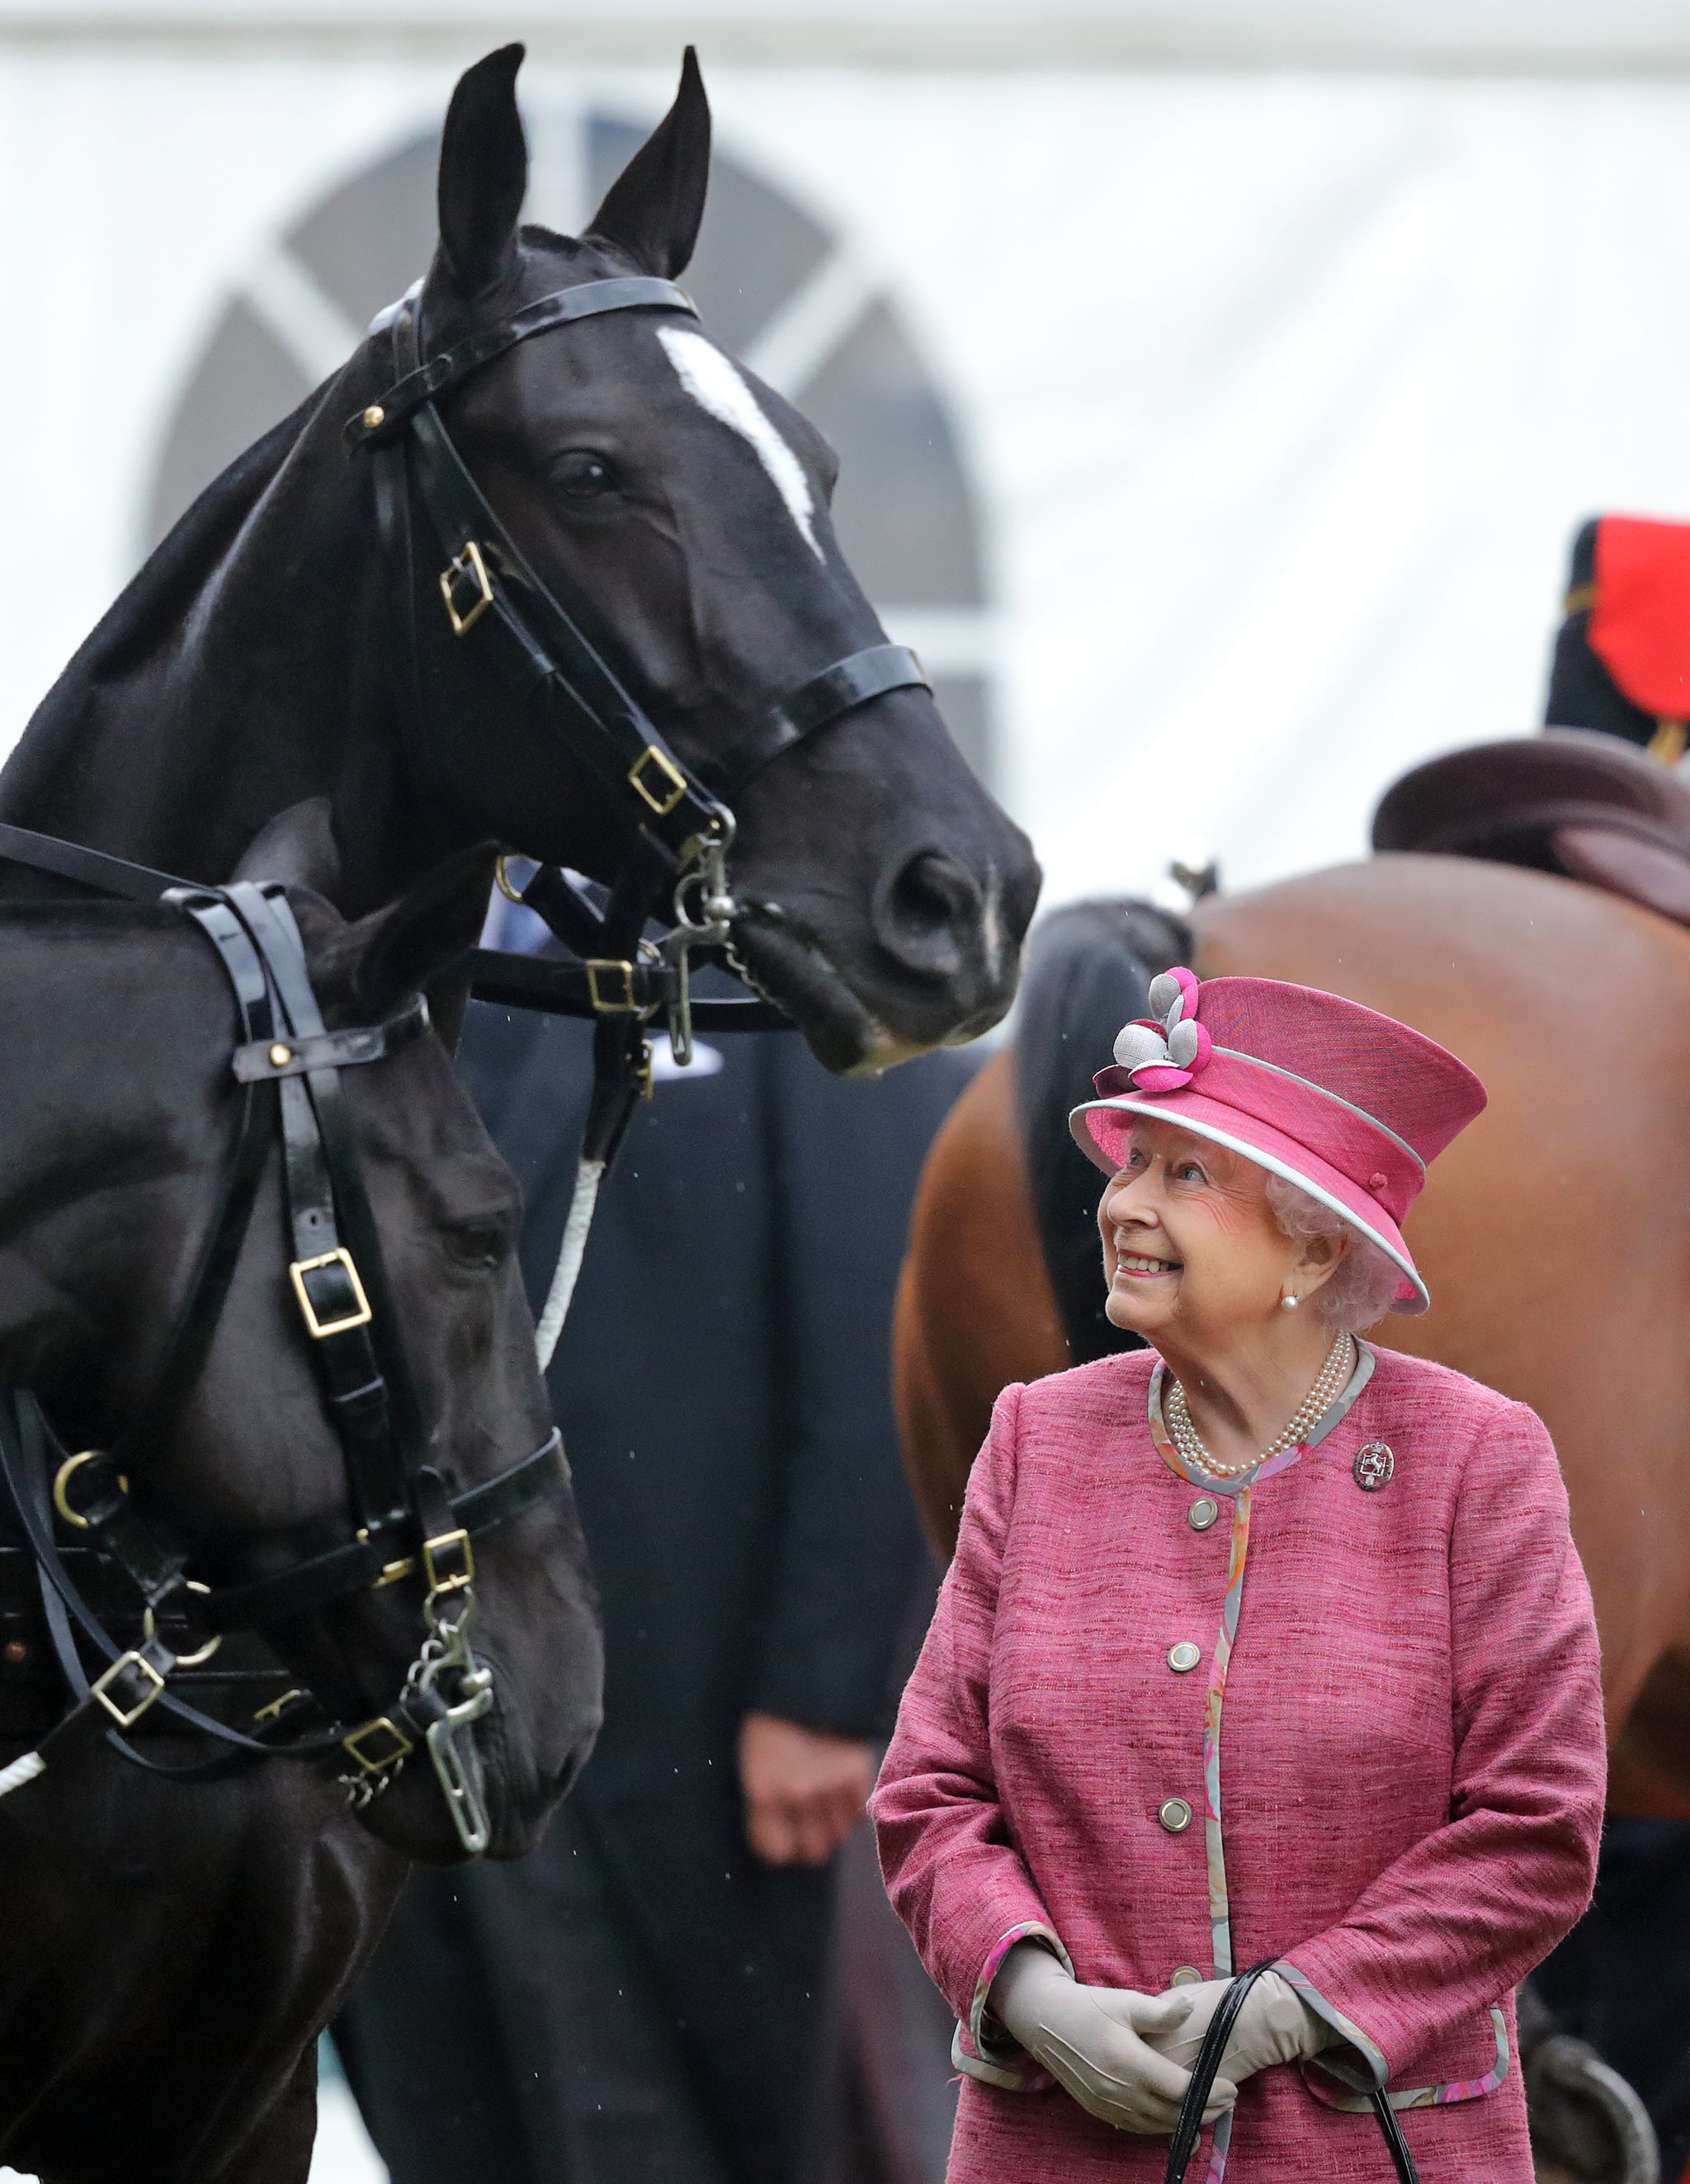 LONDON, UNITED KINGDOM - OCTOBER 19: (EMBARGOED FOR PUBLICATION IN UK NEWSPAPERS UNTIL 48 HOURS AFTER CREATE DATE AND TIME) Queen Elizabeth II reviews the King's Troop Royal Horse Artillery during their 70th anniversary parade in Hyde Park on October 19, 2017 in London, England. The King's Troop Royal Horse Artillery (KTRHA) was formed by King George VI in October 1947 and are commonly known as the 'Gunners'. (Photo by Max Mumby/Indigo/Getty Images)